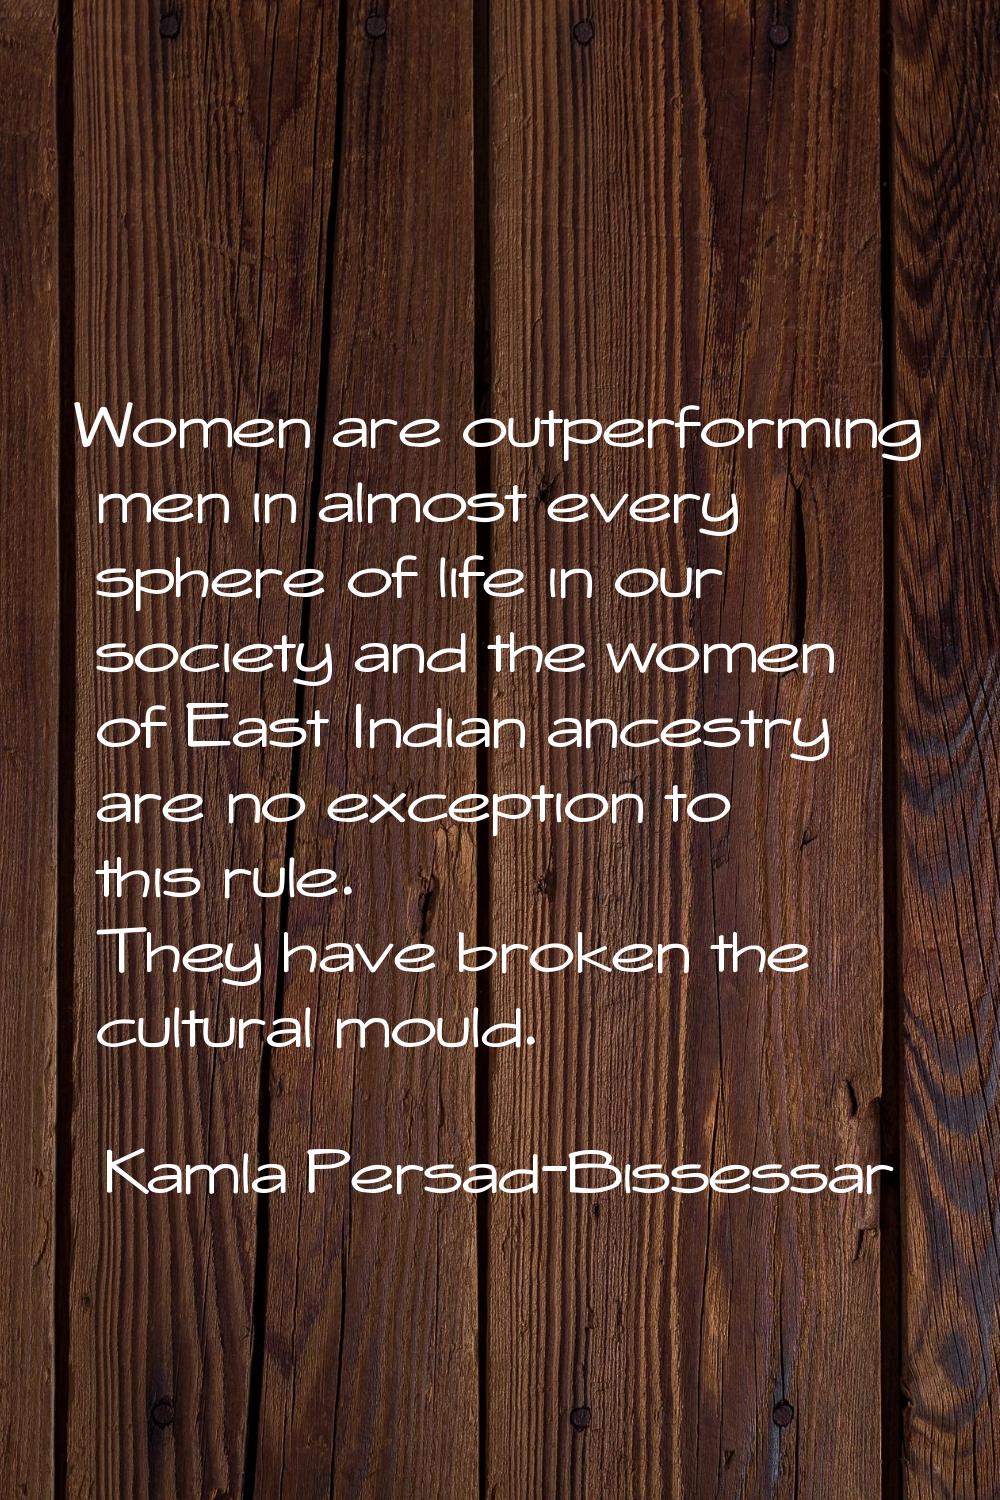 Women are outperforming men in almost every sphere of life in our society and the women of East Ind